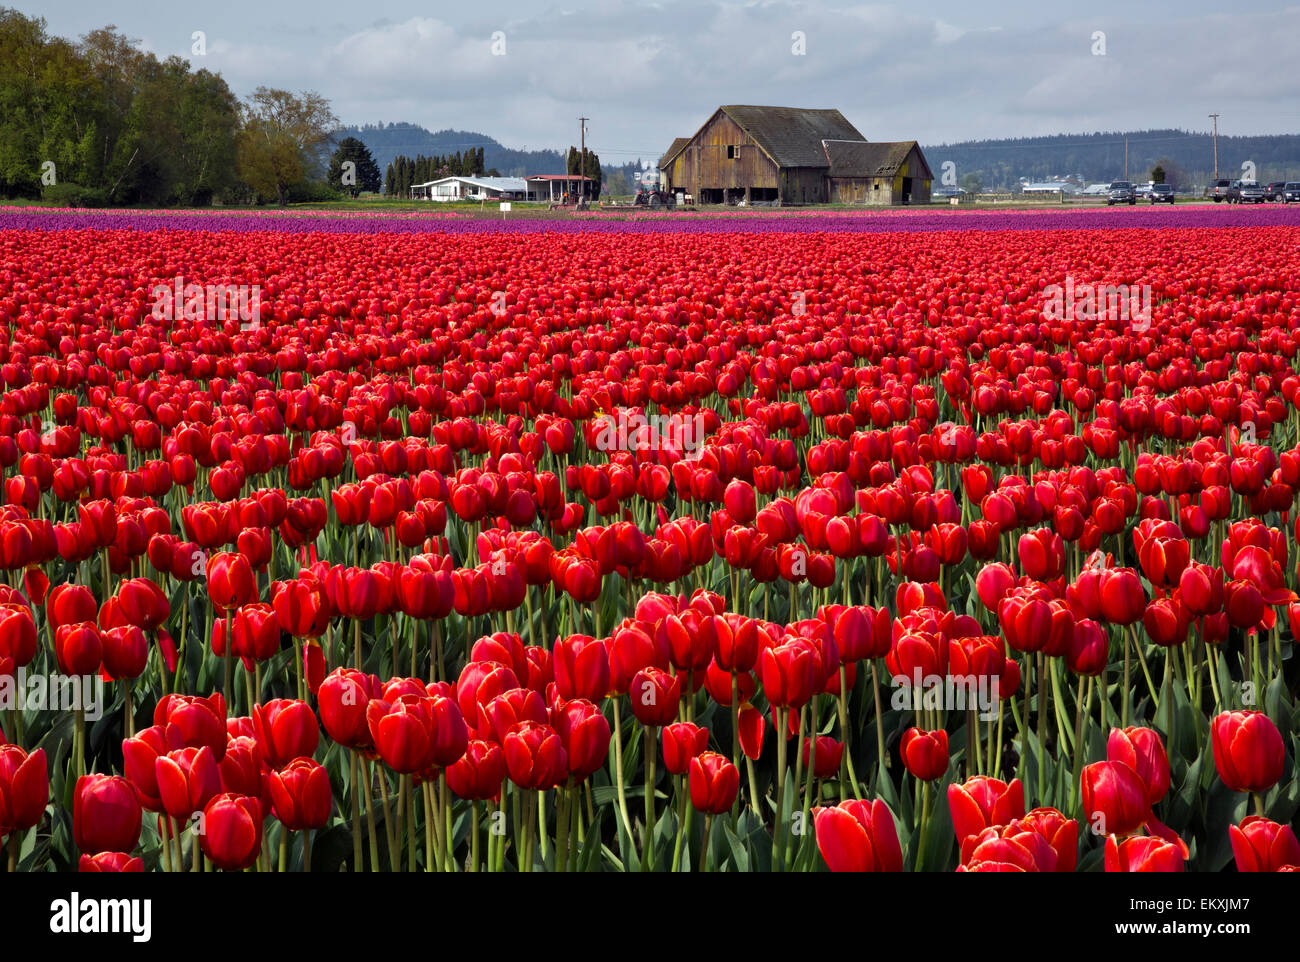 WA10242-00...WASHINGTON - Commercial field of tulips grown by the RoozenGaarde Bulb Farm in the Skagit Valley. Stock Photo